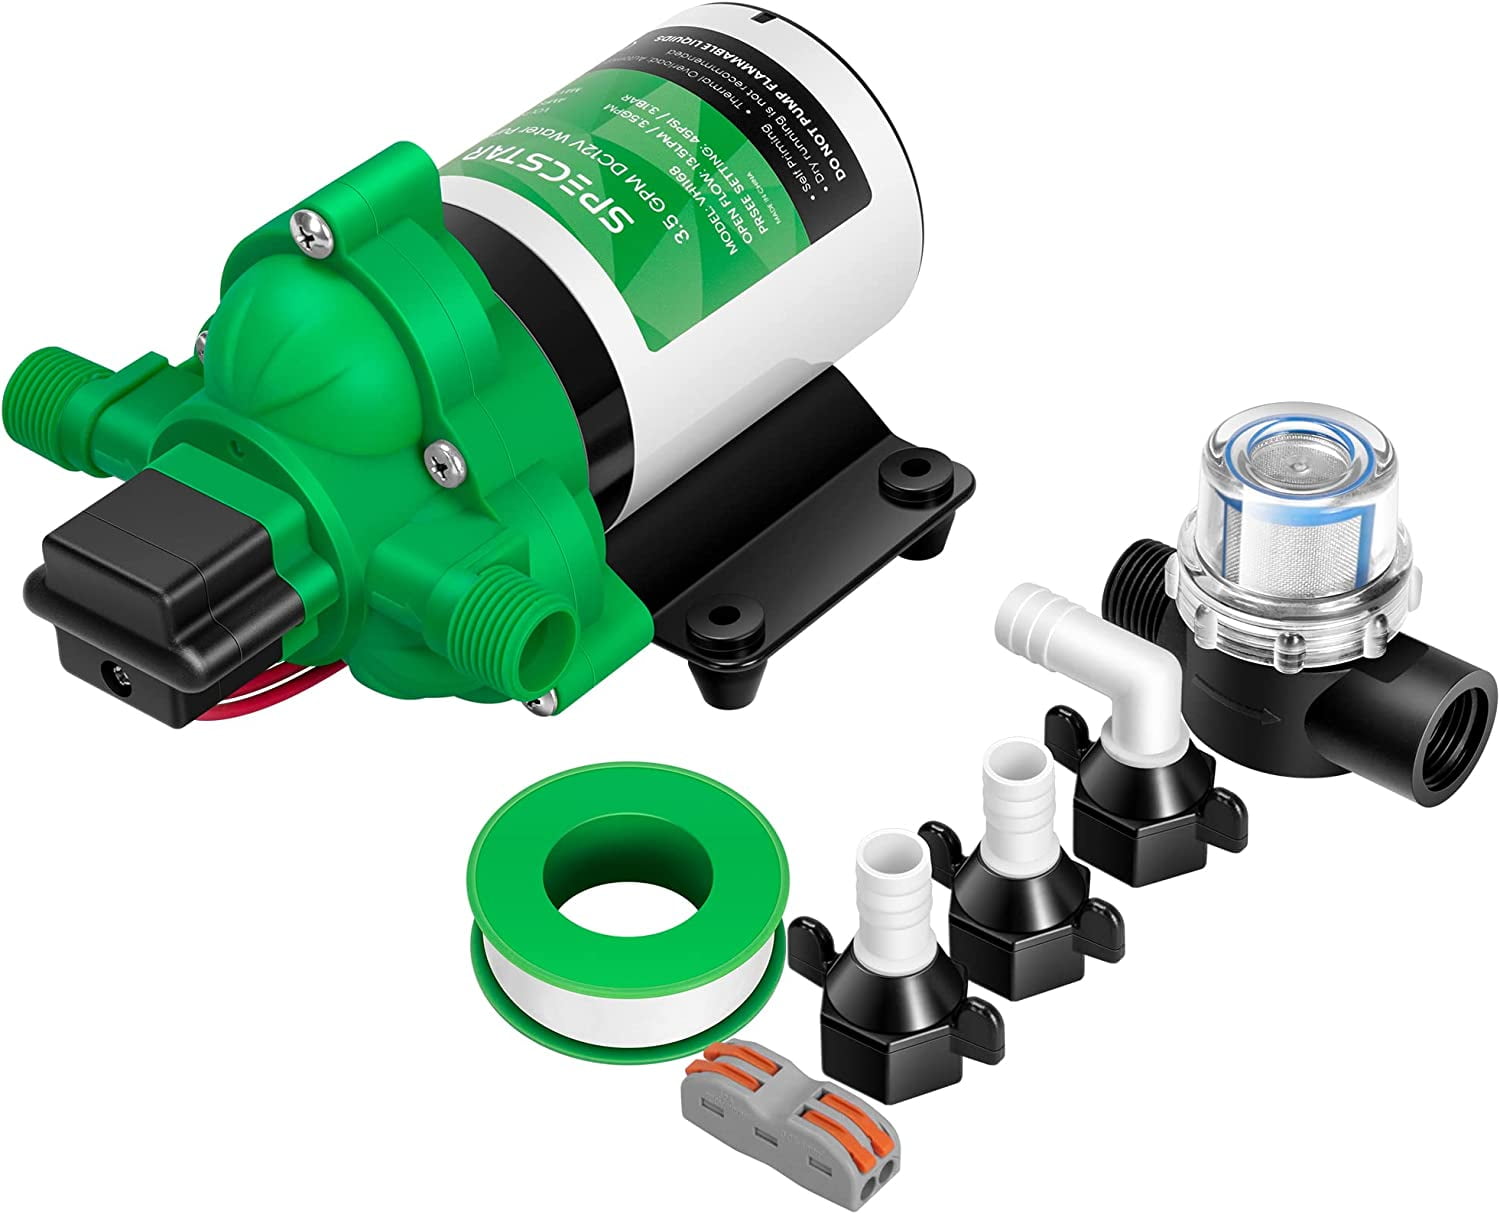 SPECSTAR RV Water Pump, 3.5GPM 50 PSI 12V DC Self Priming Diaphragm Pump  with 1/2 Hose Adapters for RV Marine Yacht 